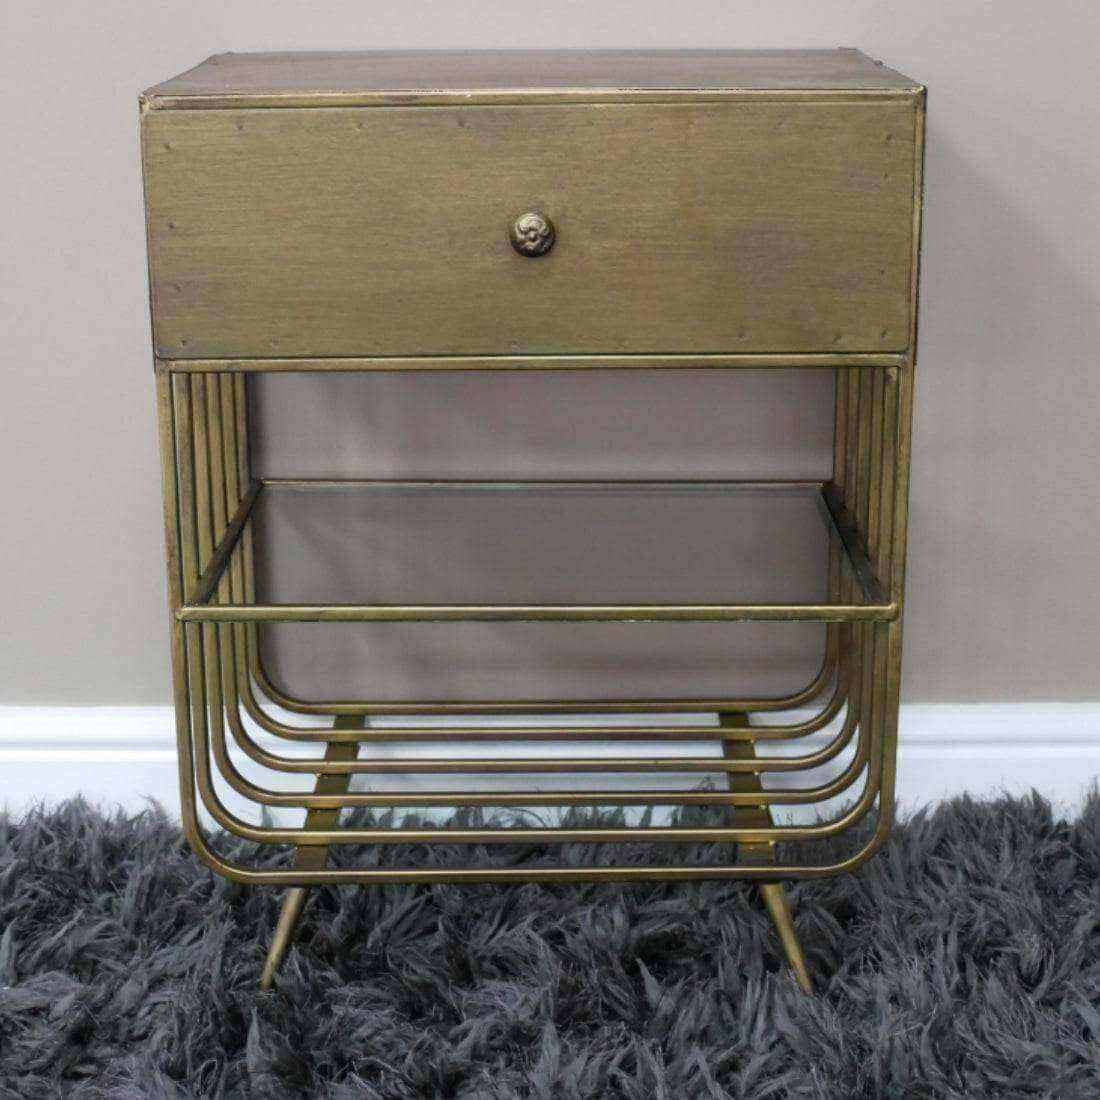 Distressed Bronzed Metal Bedside Cabinet - The Farthing